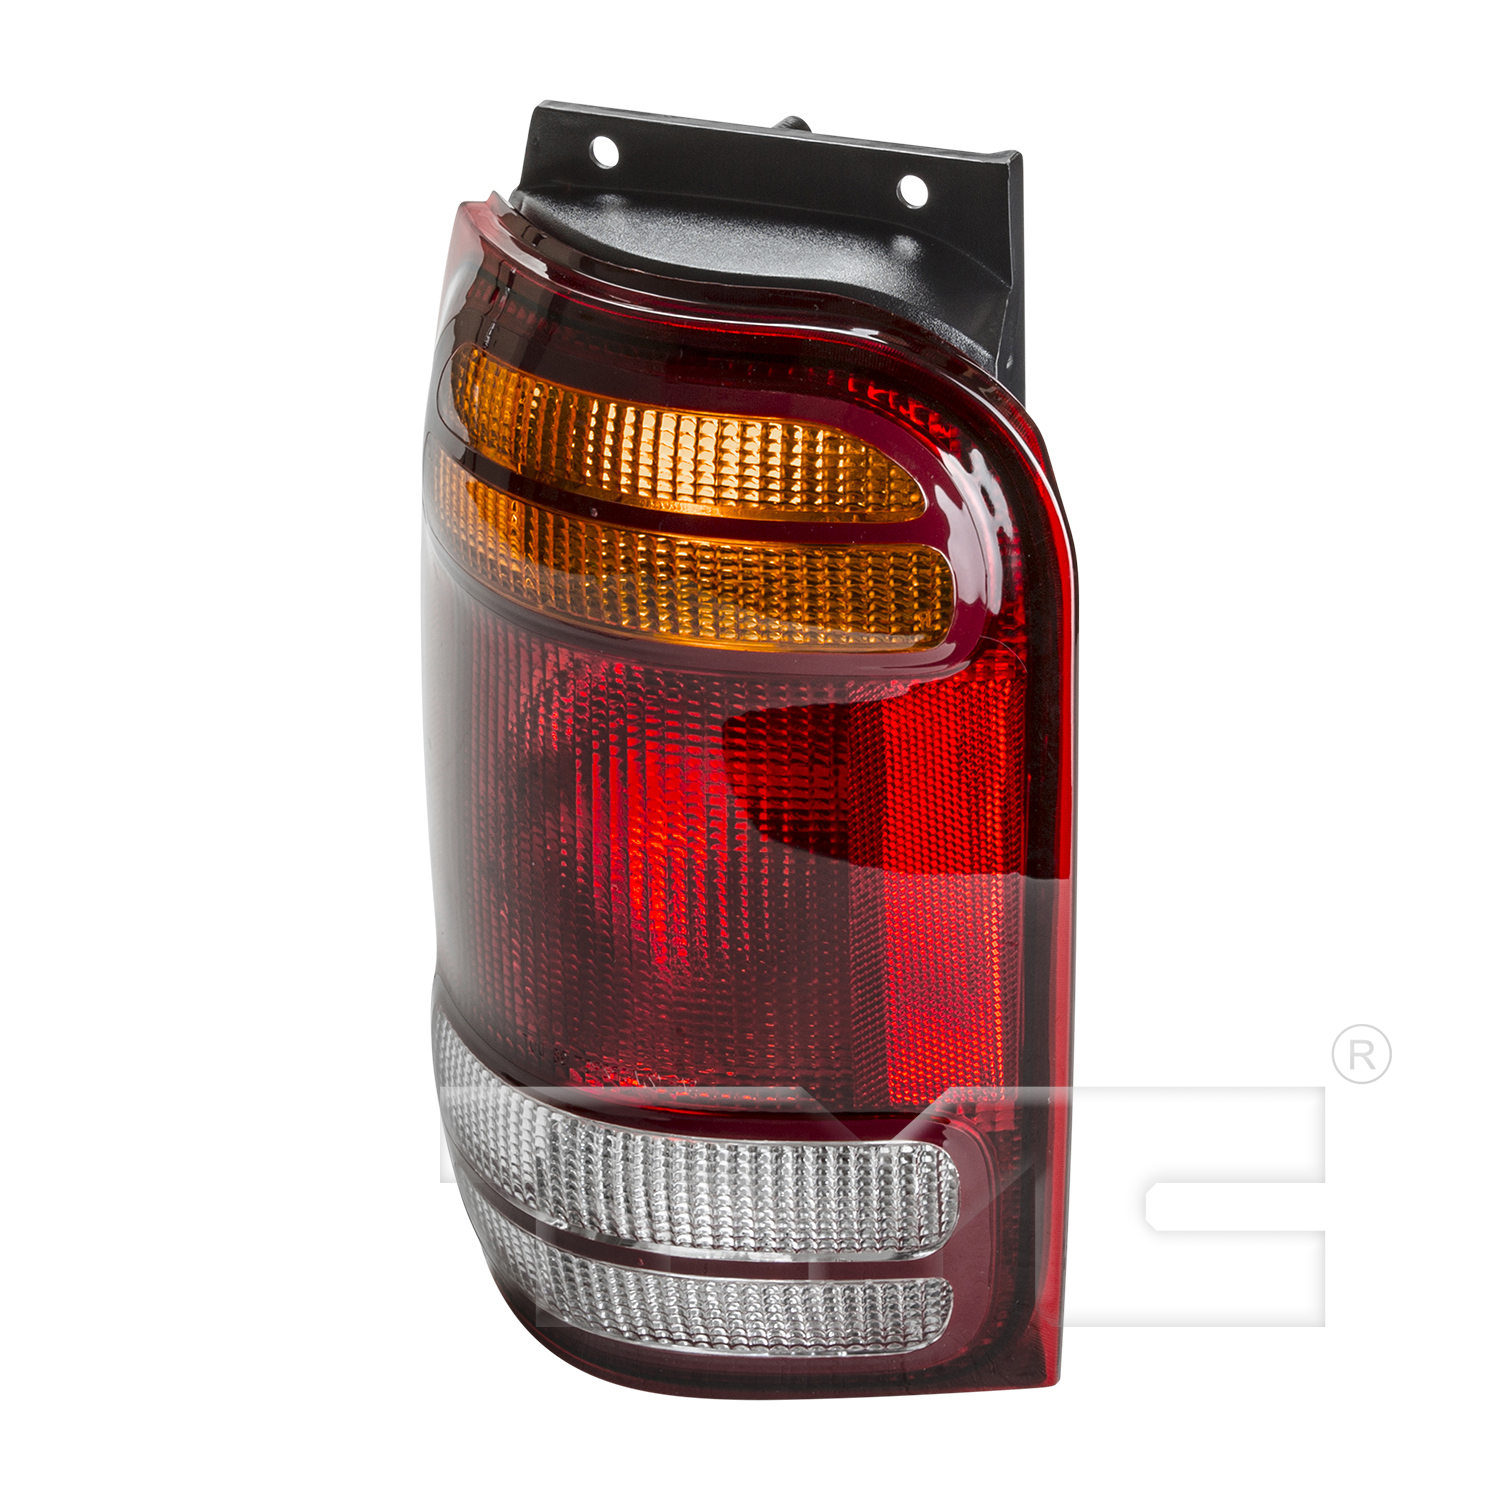 Aftermarket TAILLIGHTS for FORD - EXPLORER, EXPLORER,98-00,LT Taillamp assy